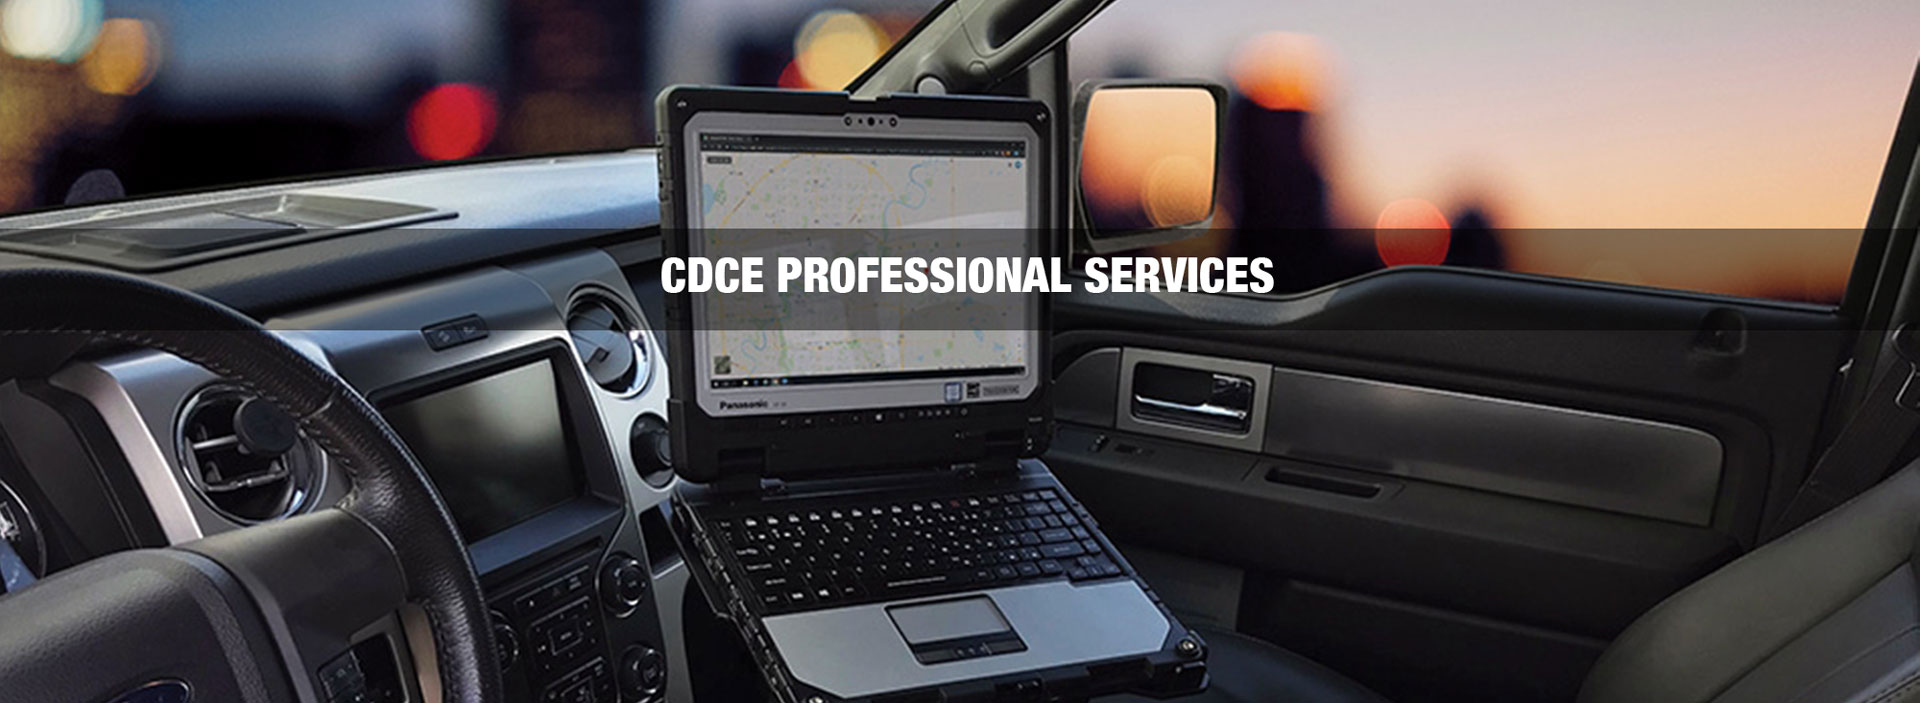 CDCE Professional Services